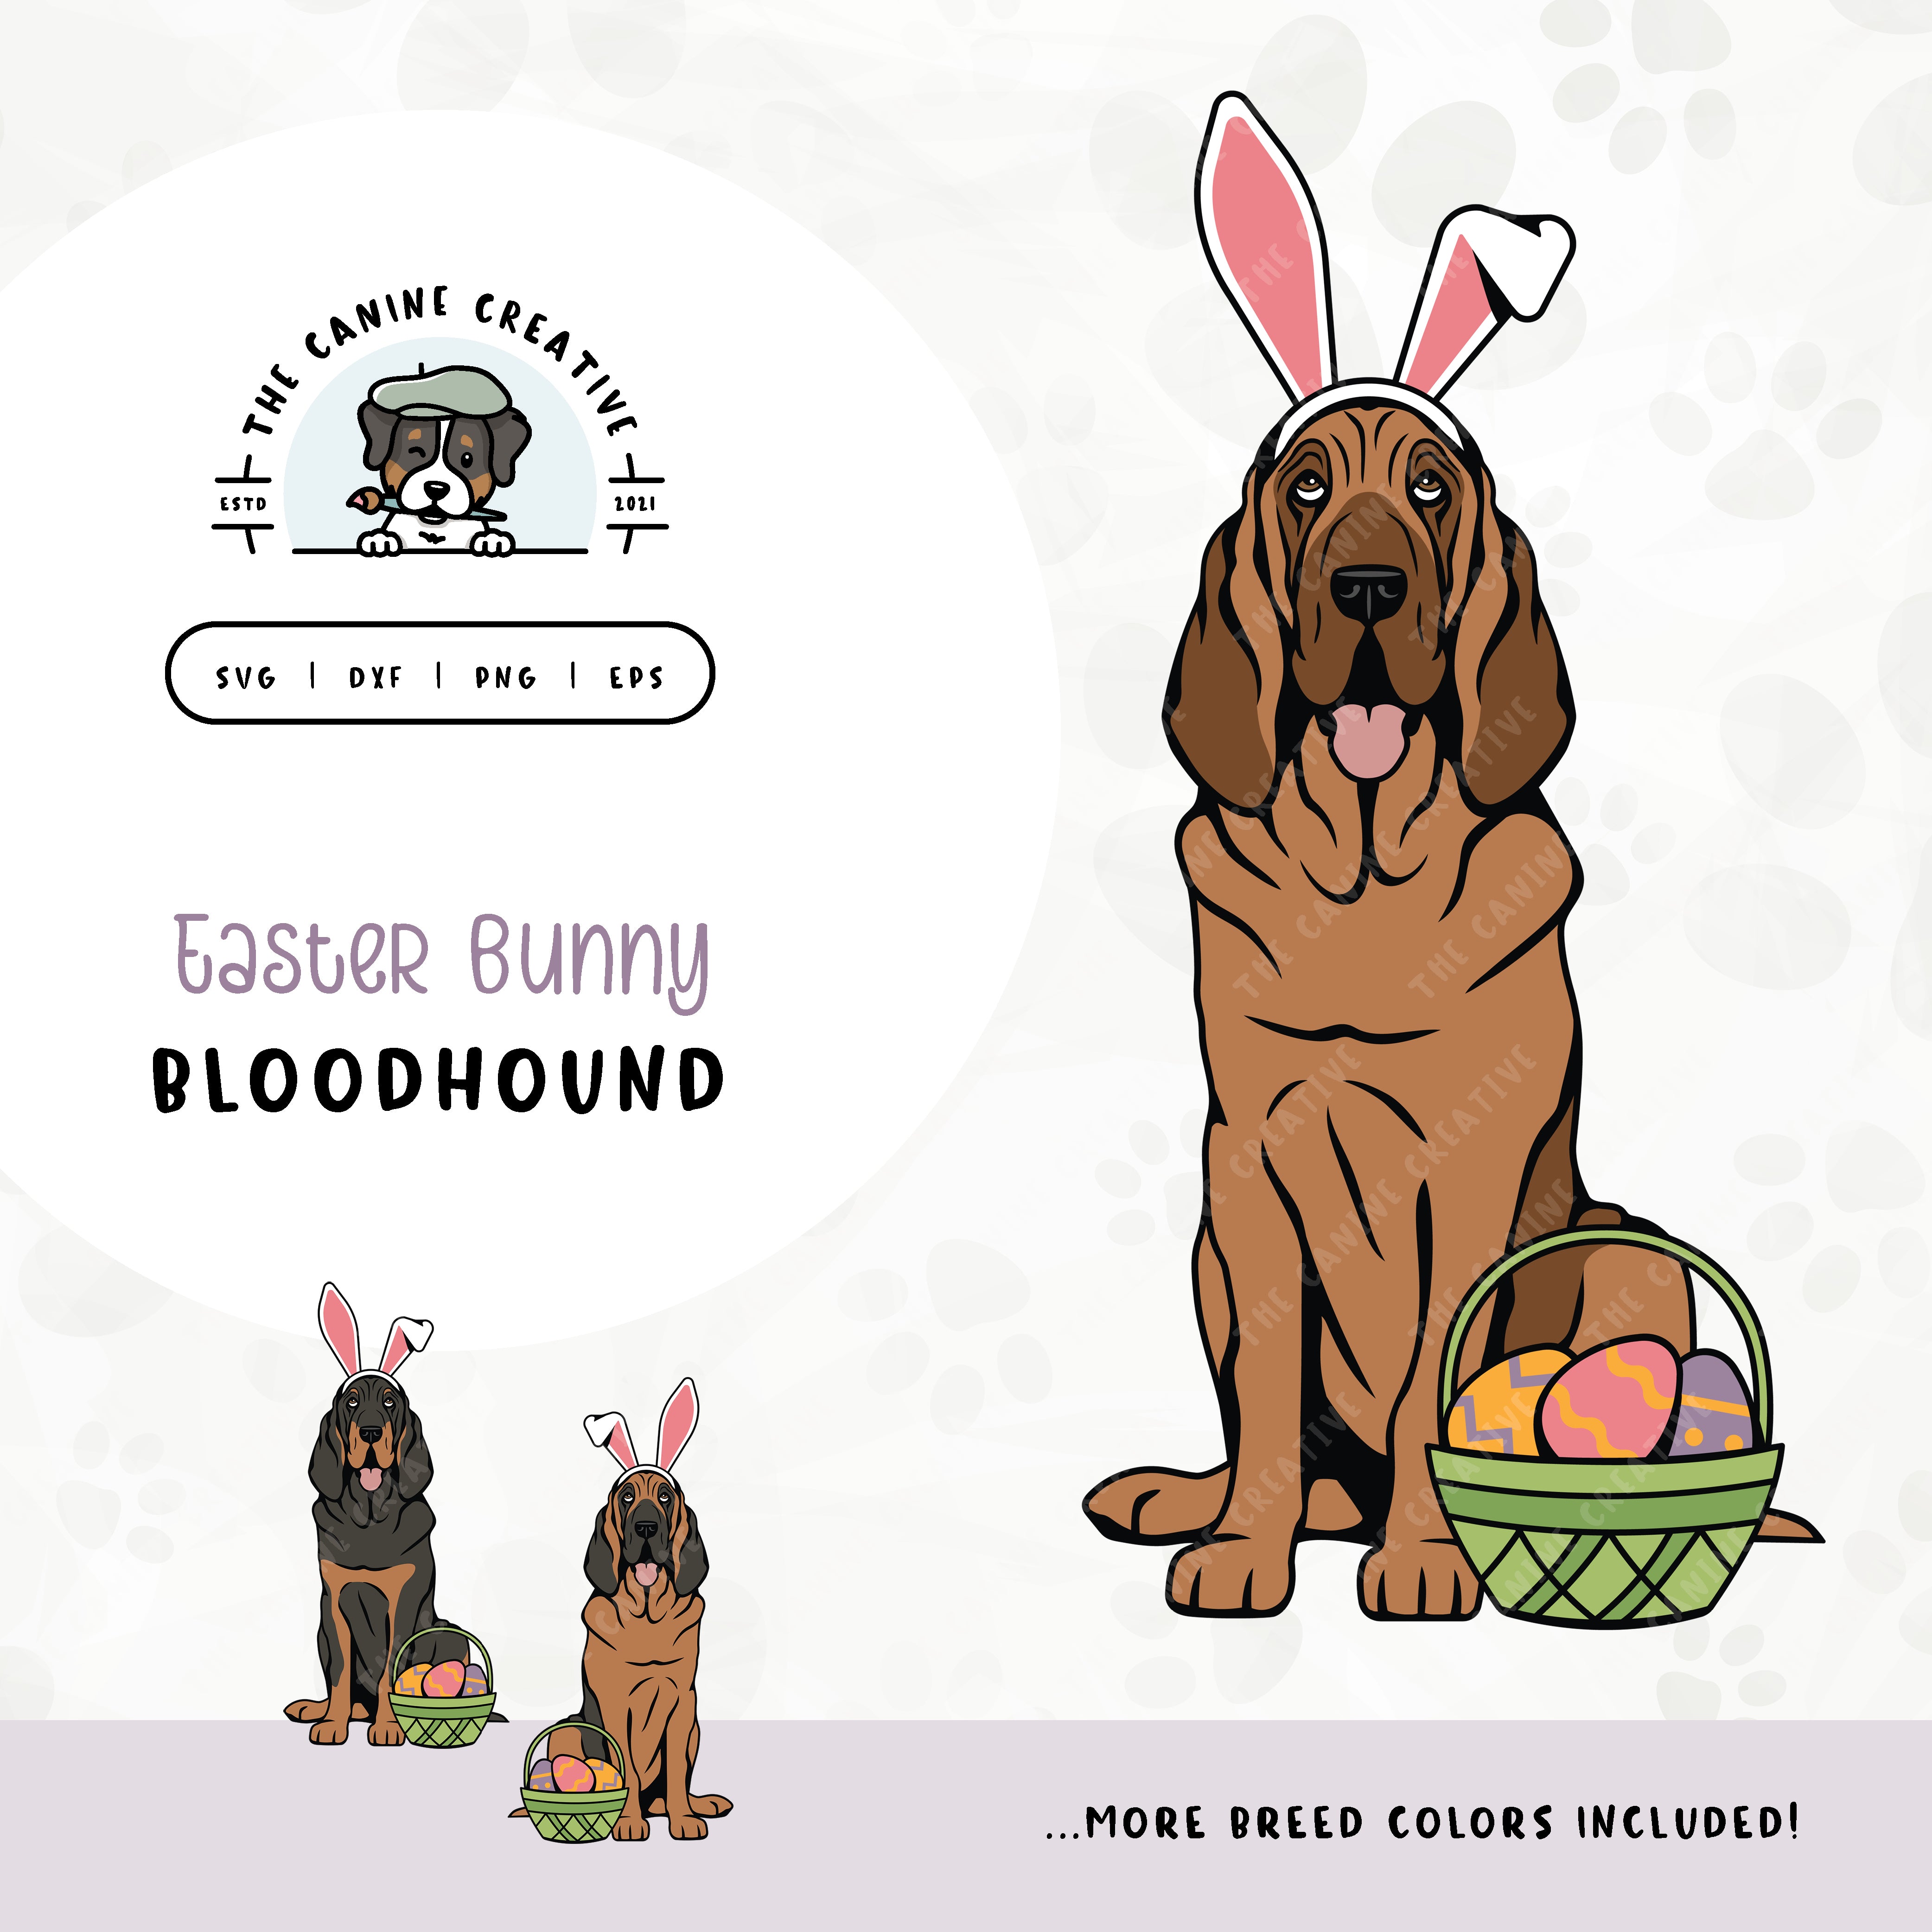 This springtime illustration features a Bloodhound adorned with festive bunny ears sitting next to a basket of brightly-colored Easter eggs. File formats include: SVG, DXF, PNG, and EPS.